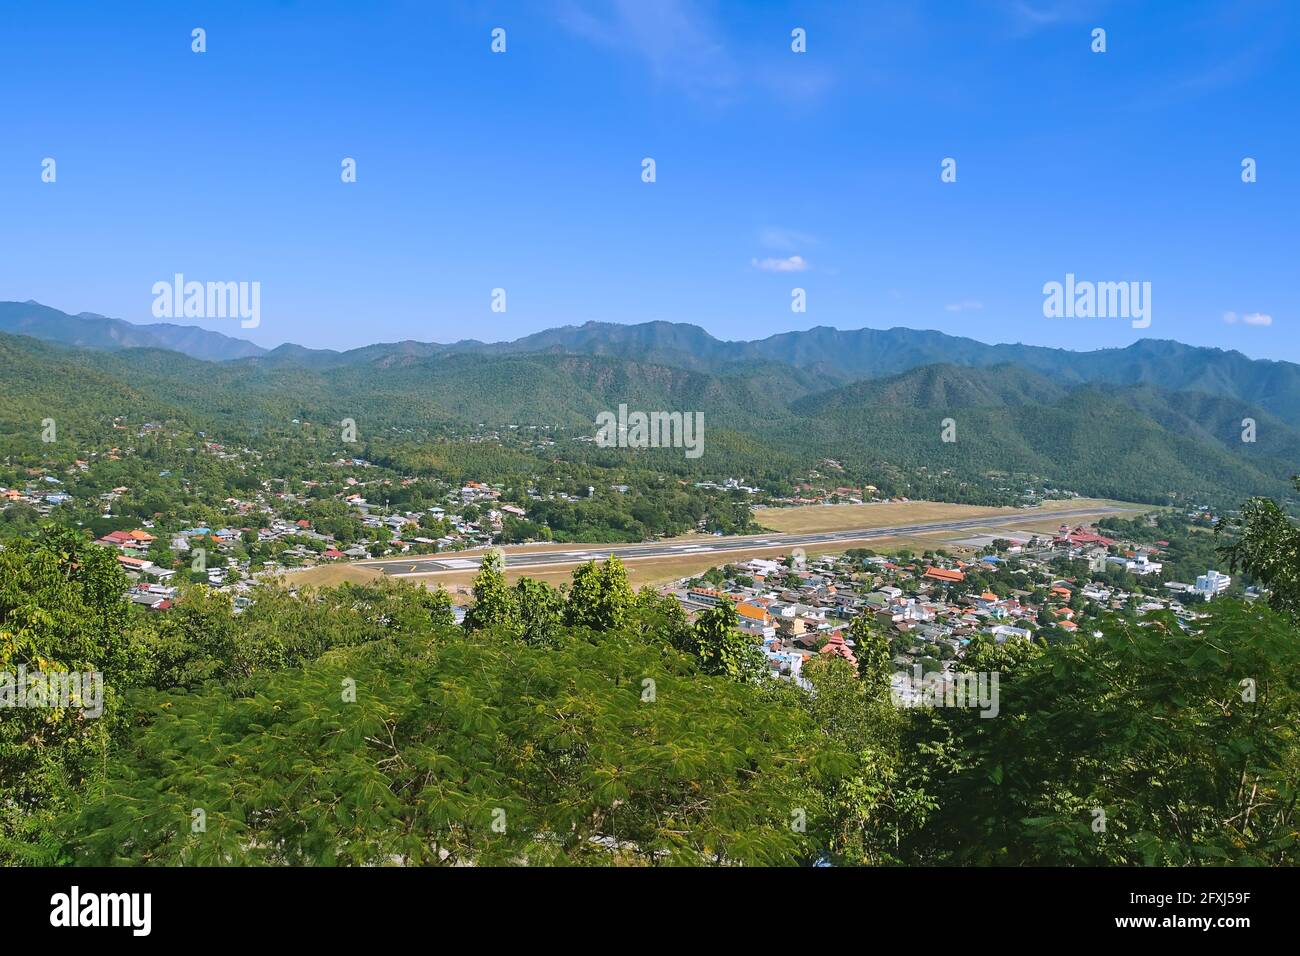 Scenery from view point of Wat Phrathat Doi Kong Mu in Mae Hong Son province, Thailand. Stock Photo